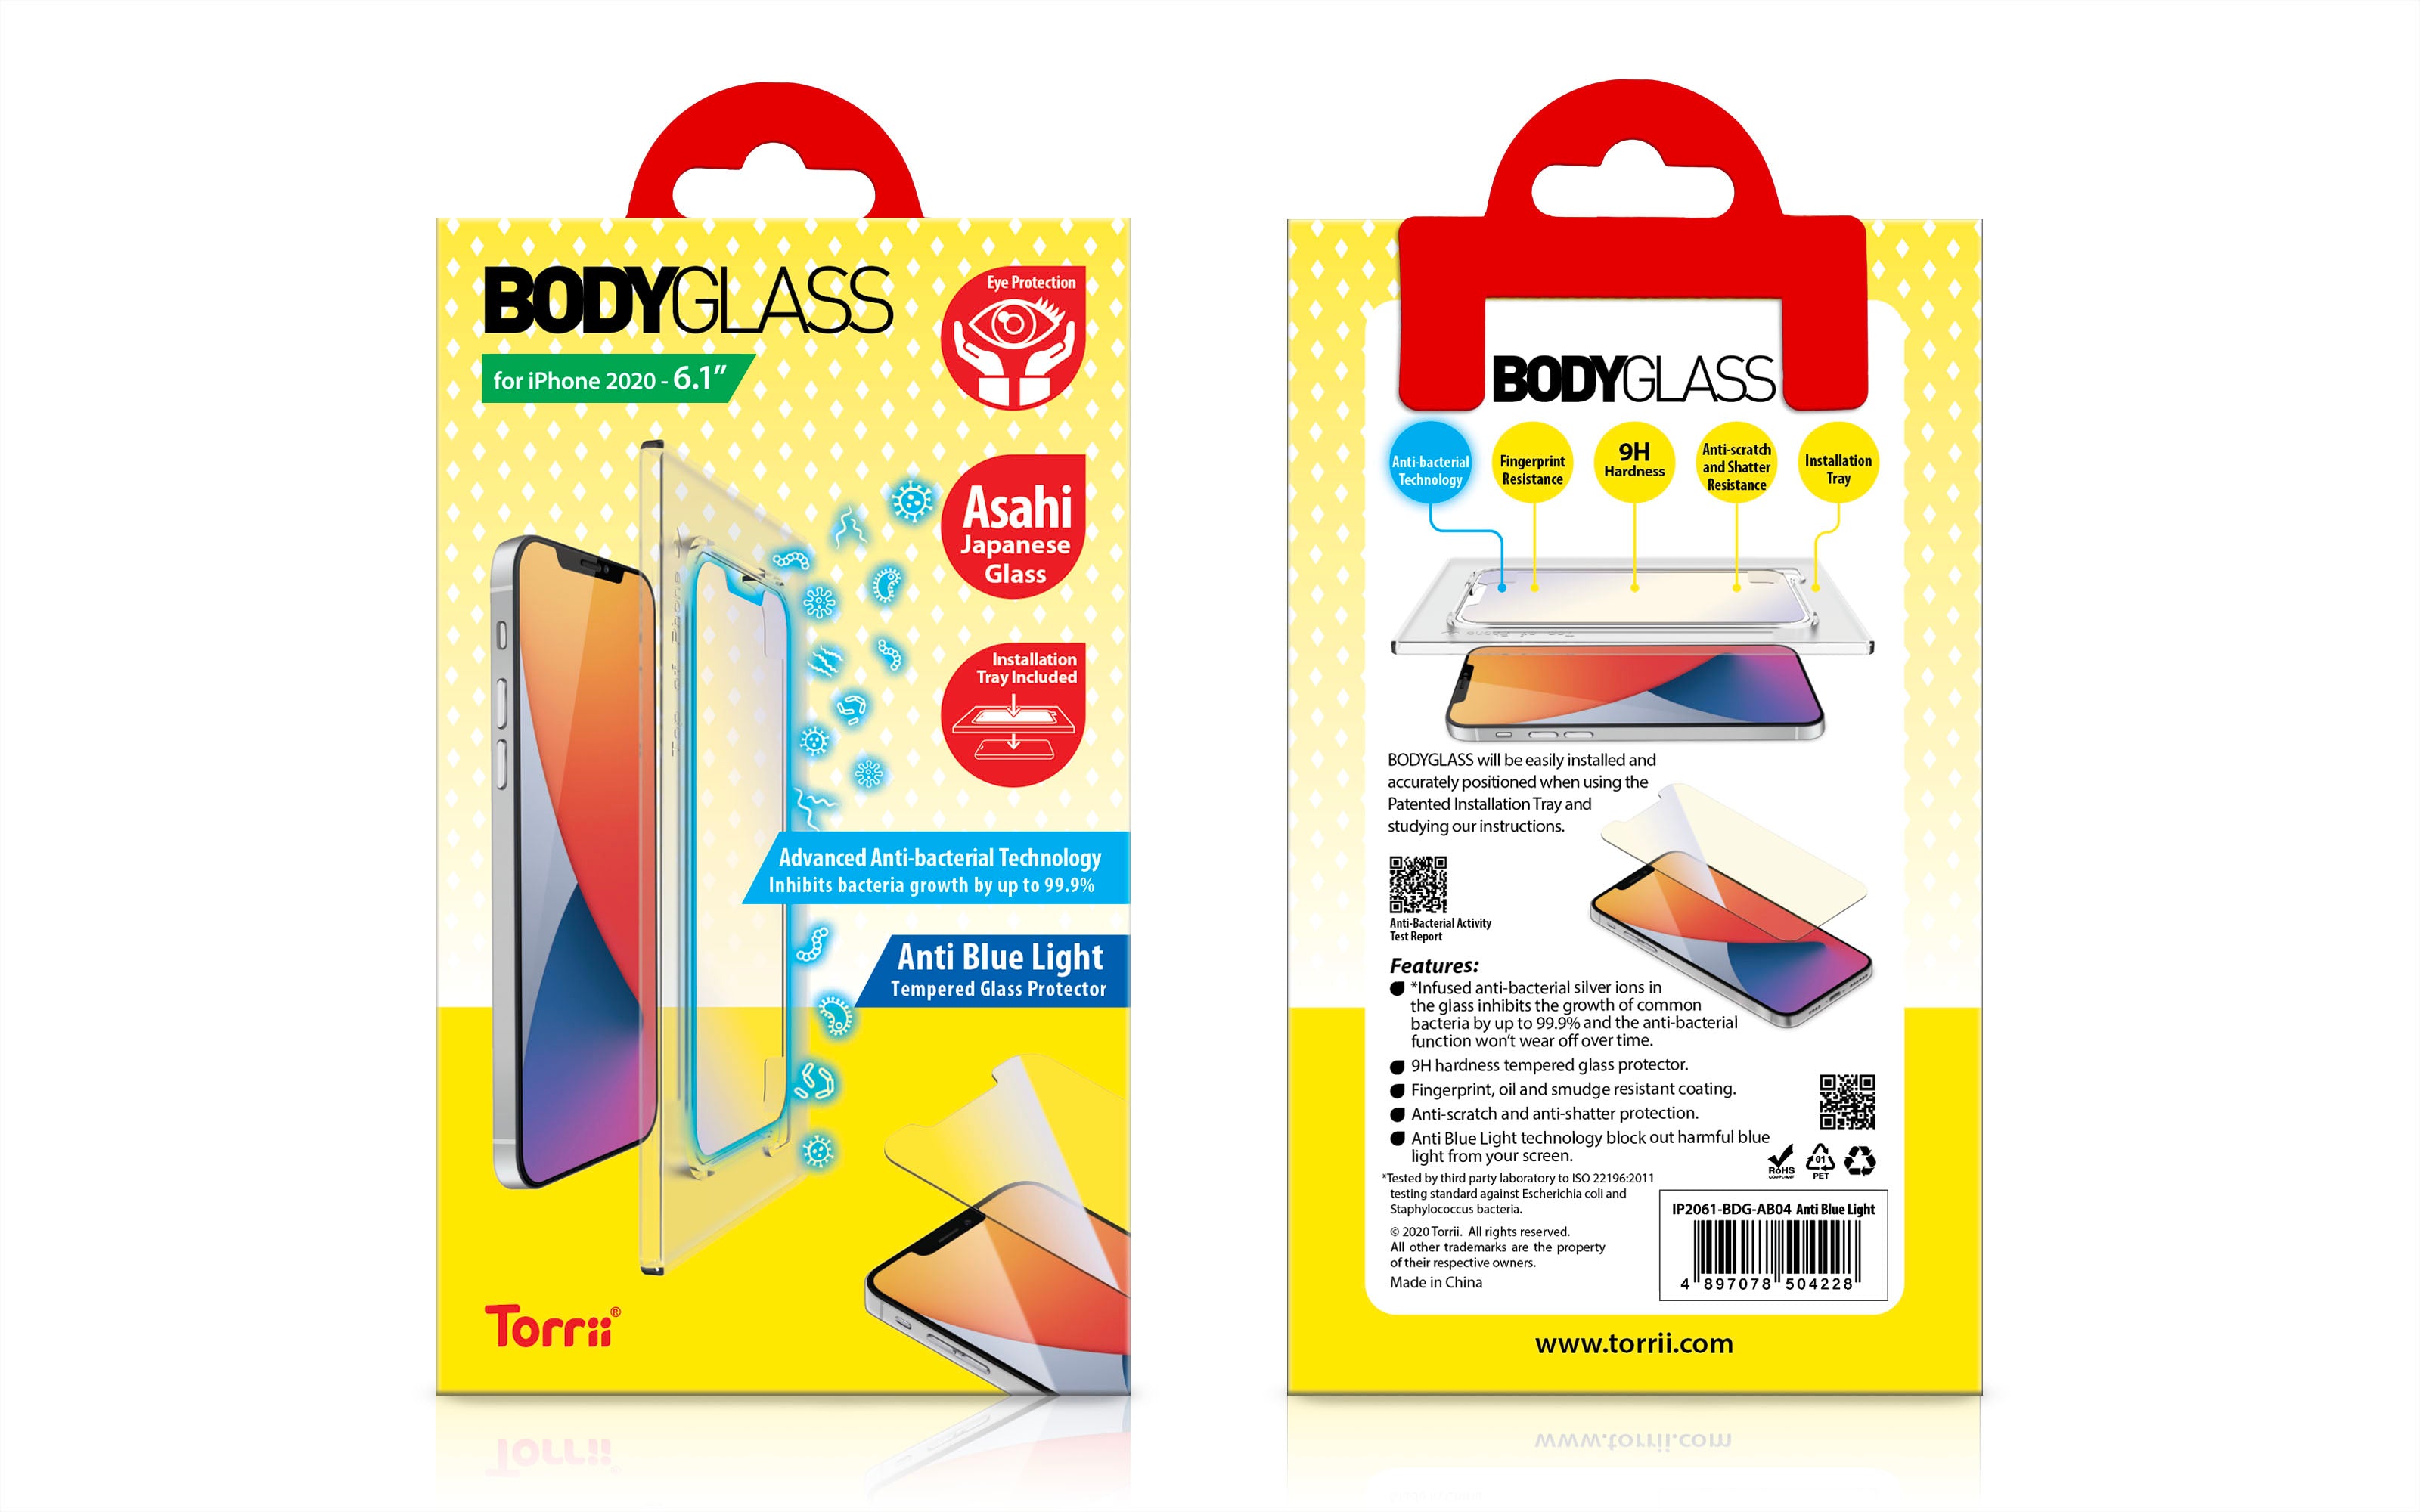 Torrii Bodyglass Anti-Bacterial Coating For iPhone 12 & 12 Pro - Anti Blue Light